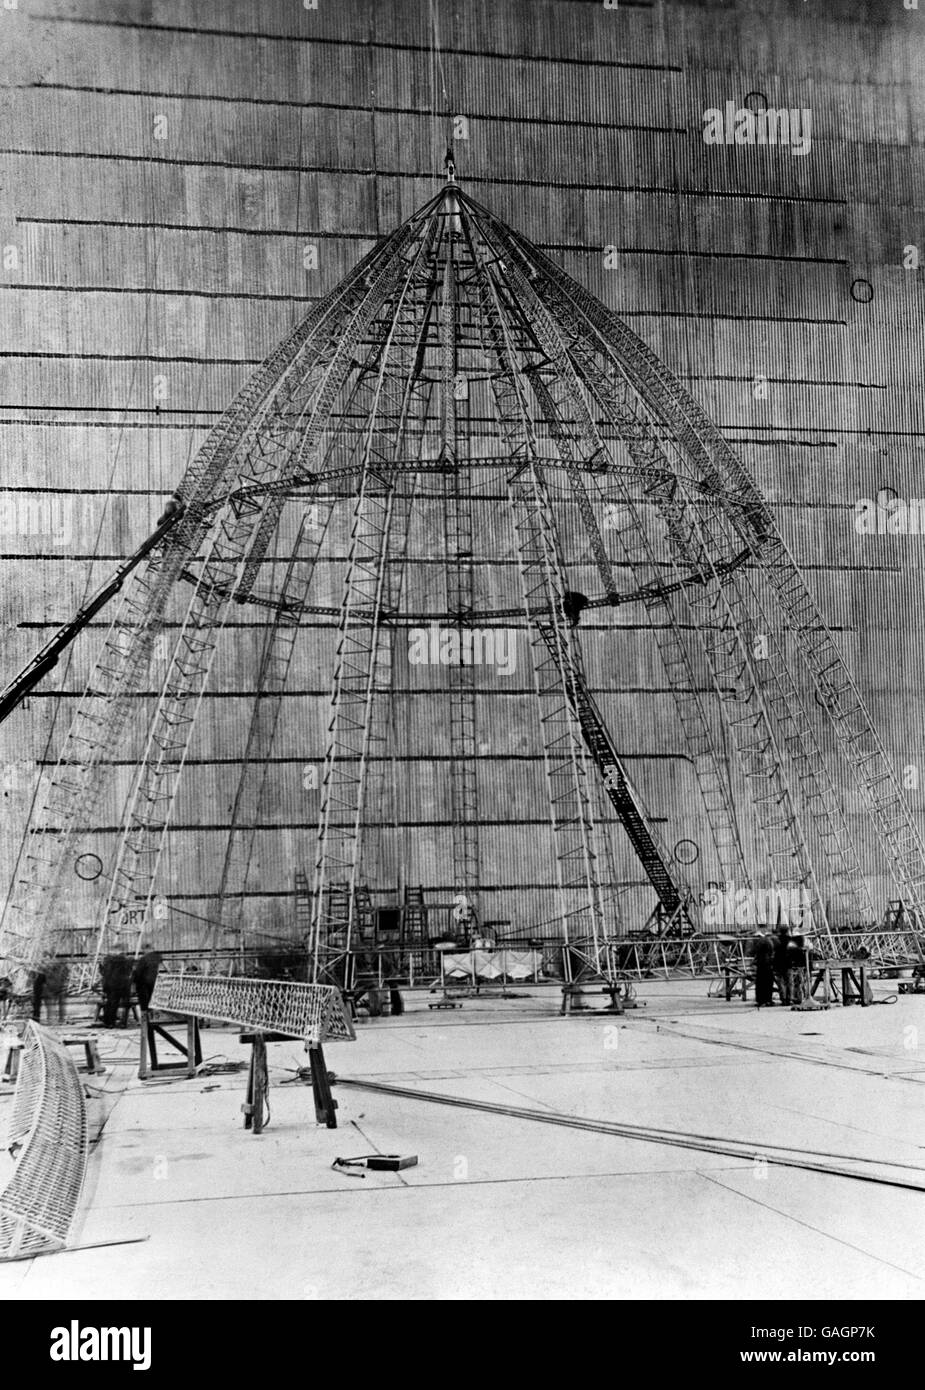 The nose piece of the R101 under construction at the Royal Airship Works at Cardington in Bedfordshire. The R101 Airship was a British airship that crashed on October 5, 1930, in France, during its maiden overseas voyage, killing 48 people. Amongst airship accidents of the 1930s, the loss of life surpassed the Hindenburg disaster of 1937, and was second only to that of the USS Akron crash of 1933. The demise of the R101 effectively ended British employment of rigid airships. Stock Photo